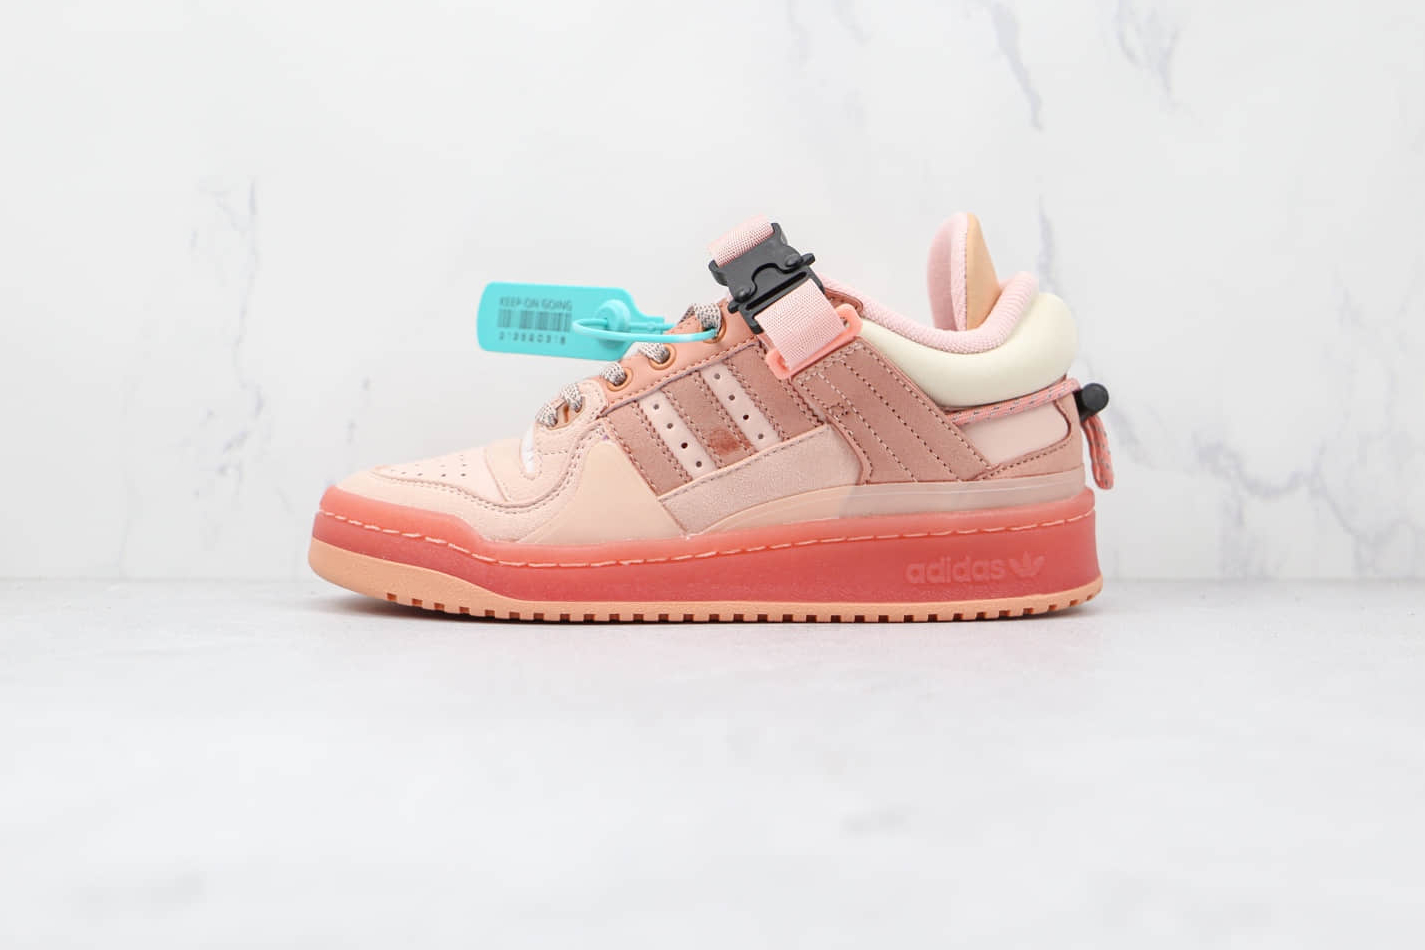 Adidas Bad Bunny x Forum Buckle Low 'Easter Egg' GW0265 - Limited Edition Collaboration sneakers!